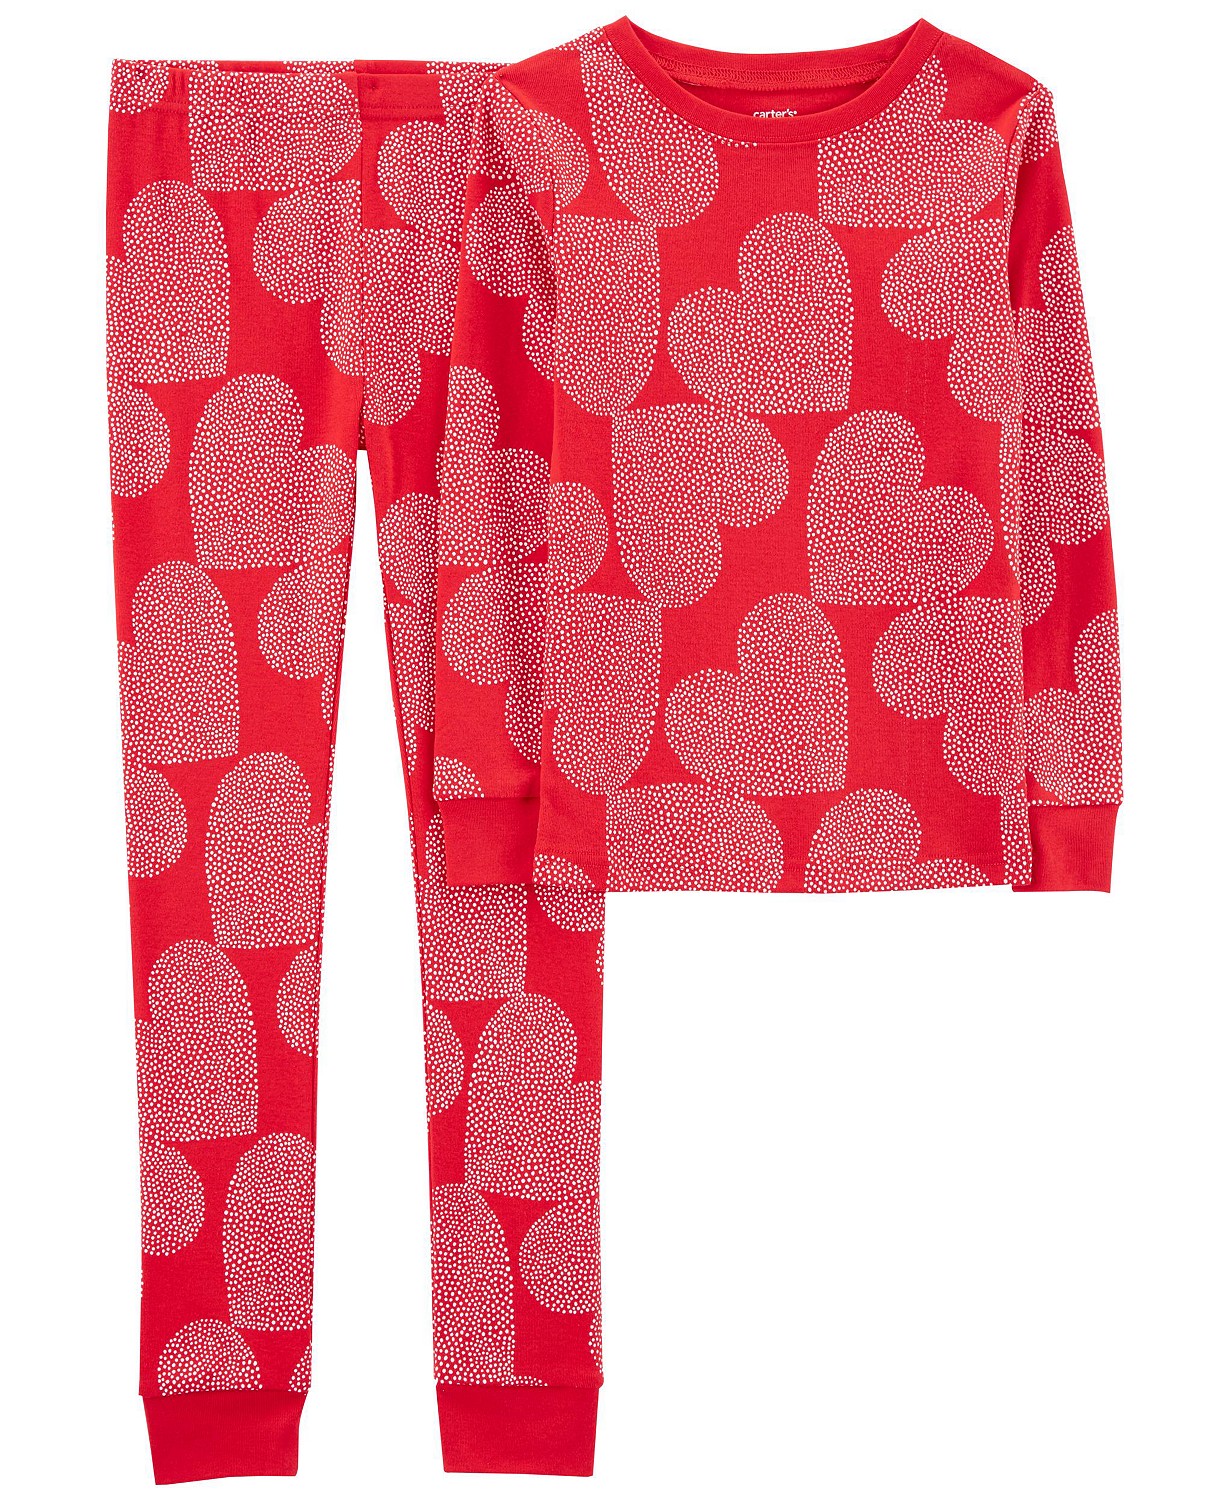 Little Boys and Girls Hearts Top and Snug Fit Pajamas, 2 Piece Set